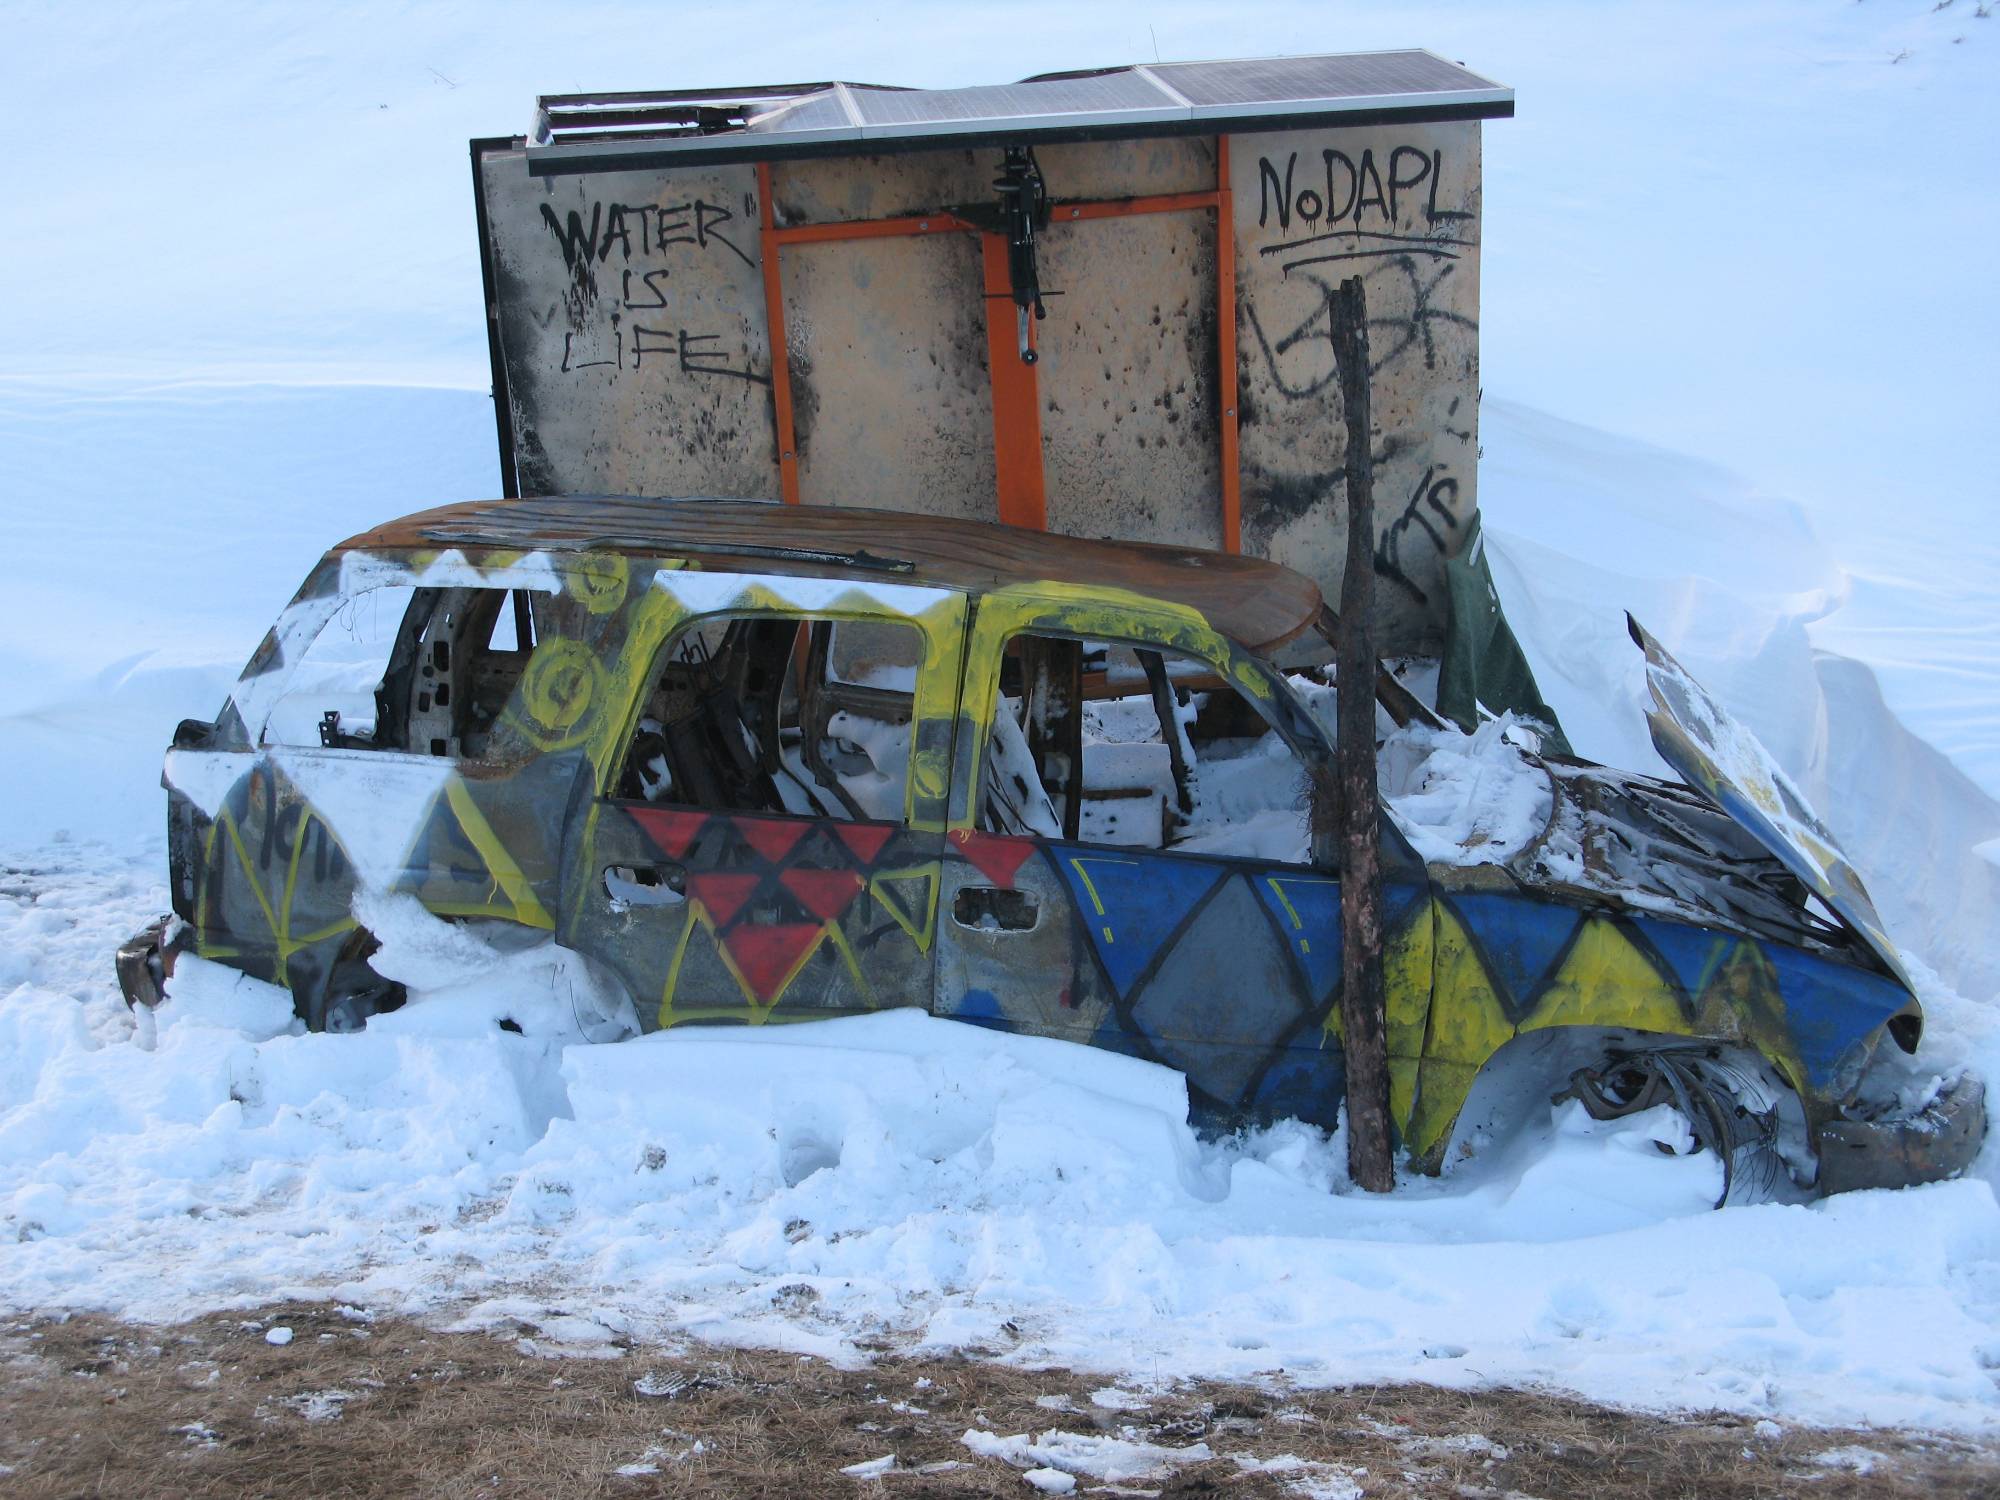 An image of a painted vehicle from "Standing Rock: Photographs of an Indigenous Movement"